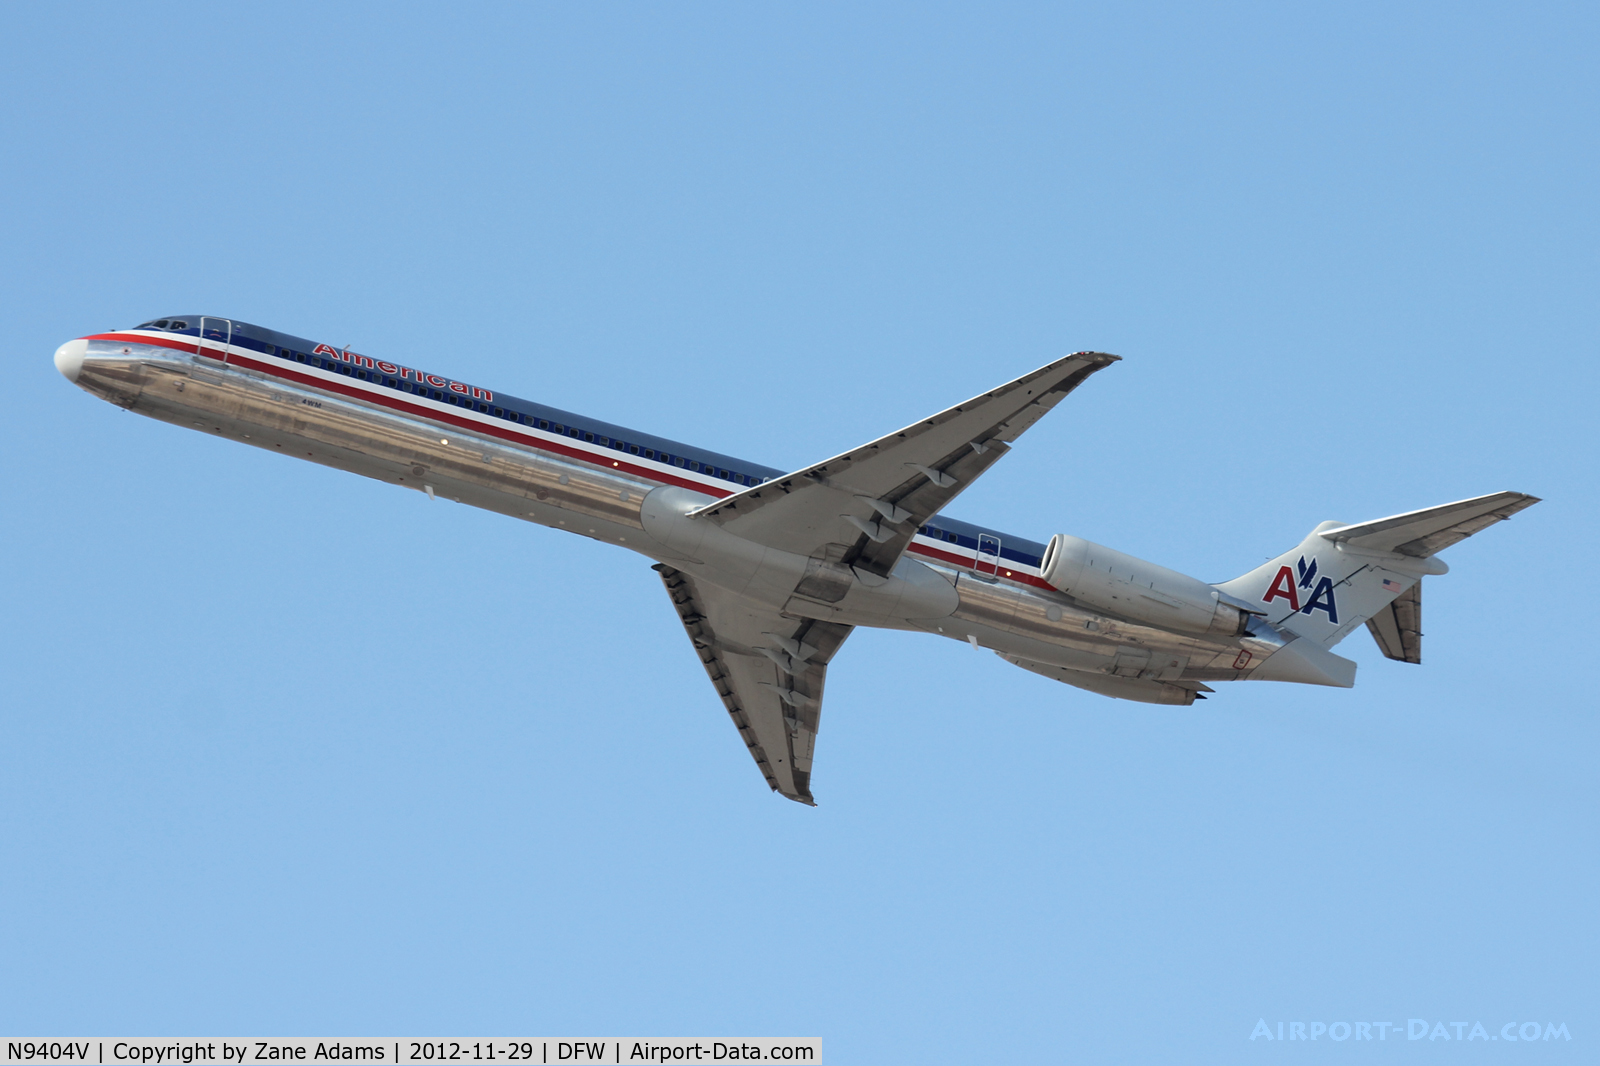 N9404V, 1992 McDonnell Douglas MD-83 (DC-9-83) C/N 53140, American Airlines departing DFW Airport